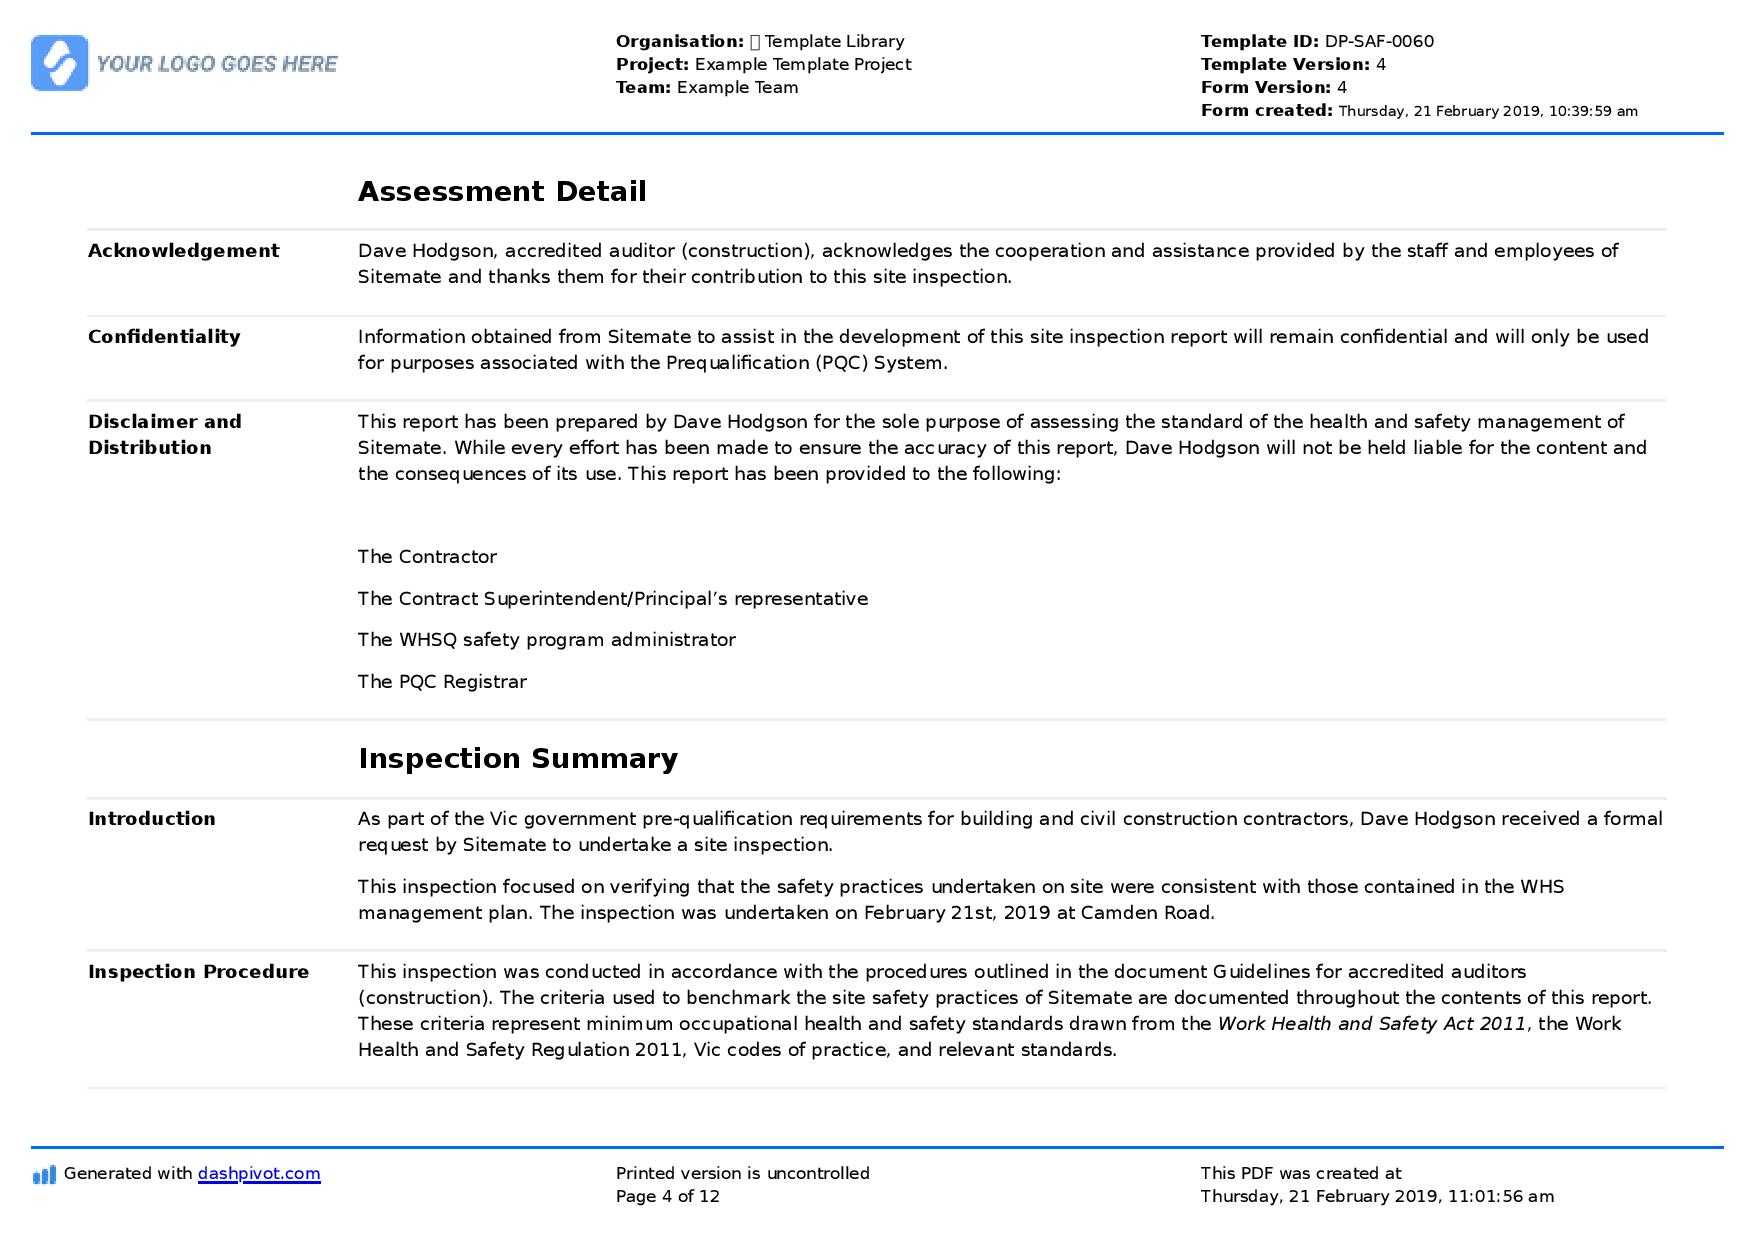 Site Inspection Report: Free Template, Sample And A Proven For Template For Information Report